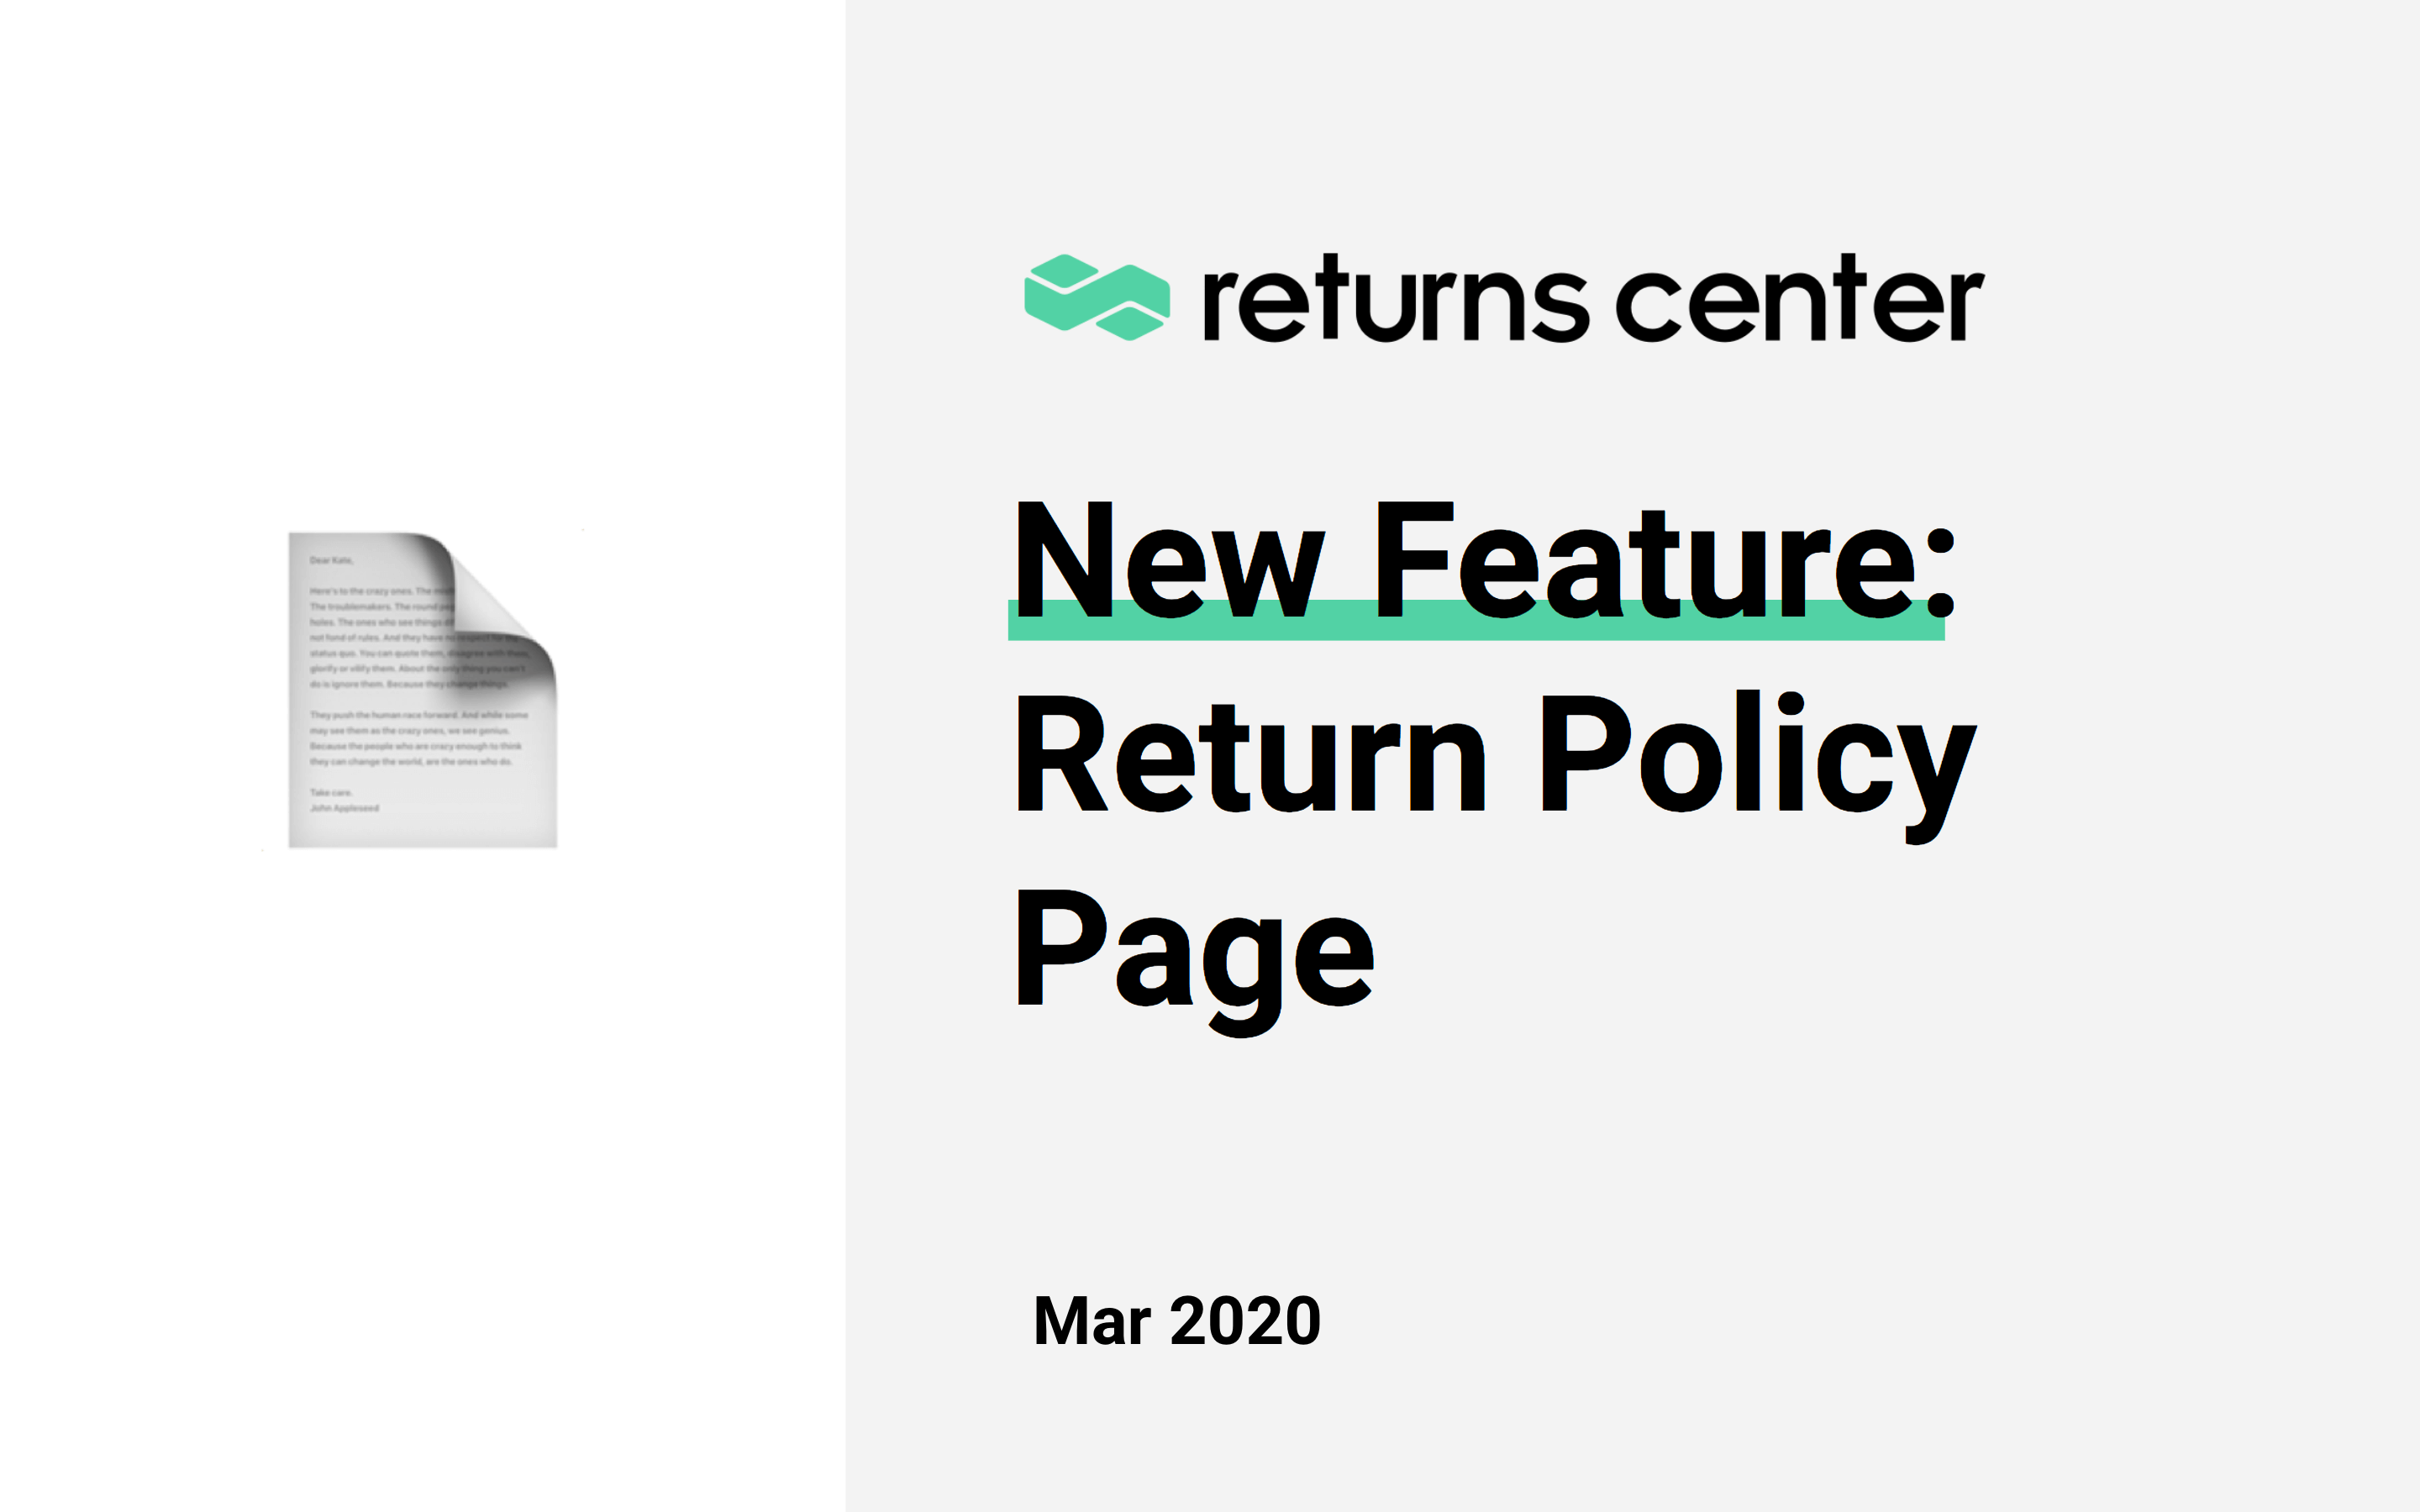 New Feature: Return Policy Page